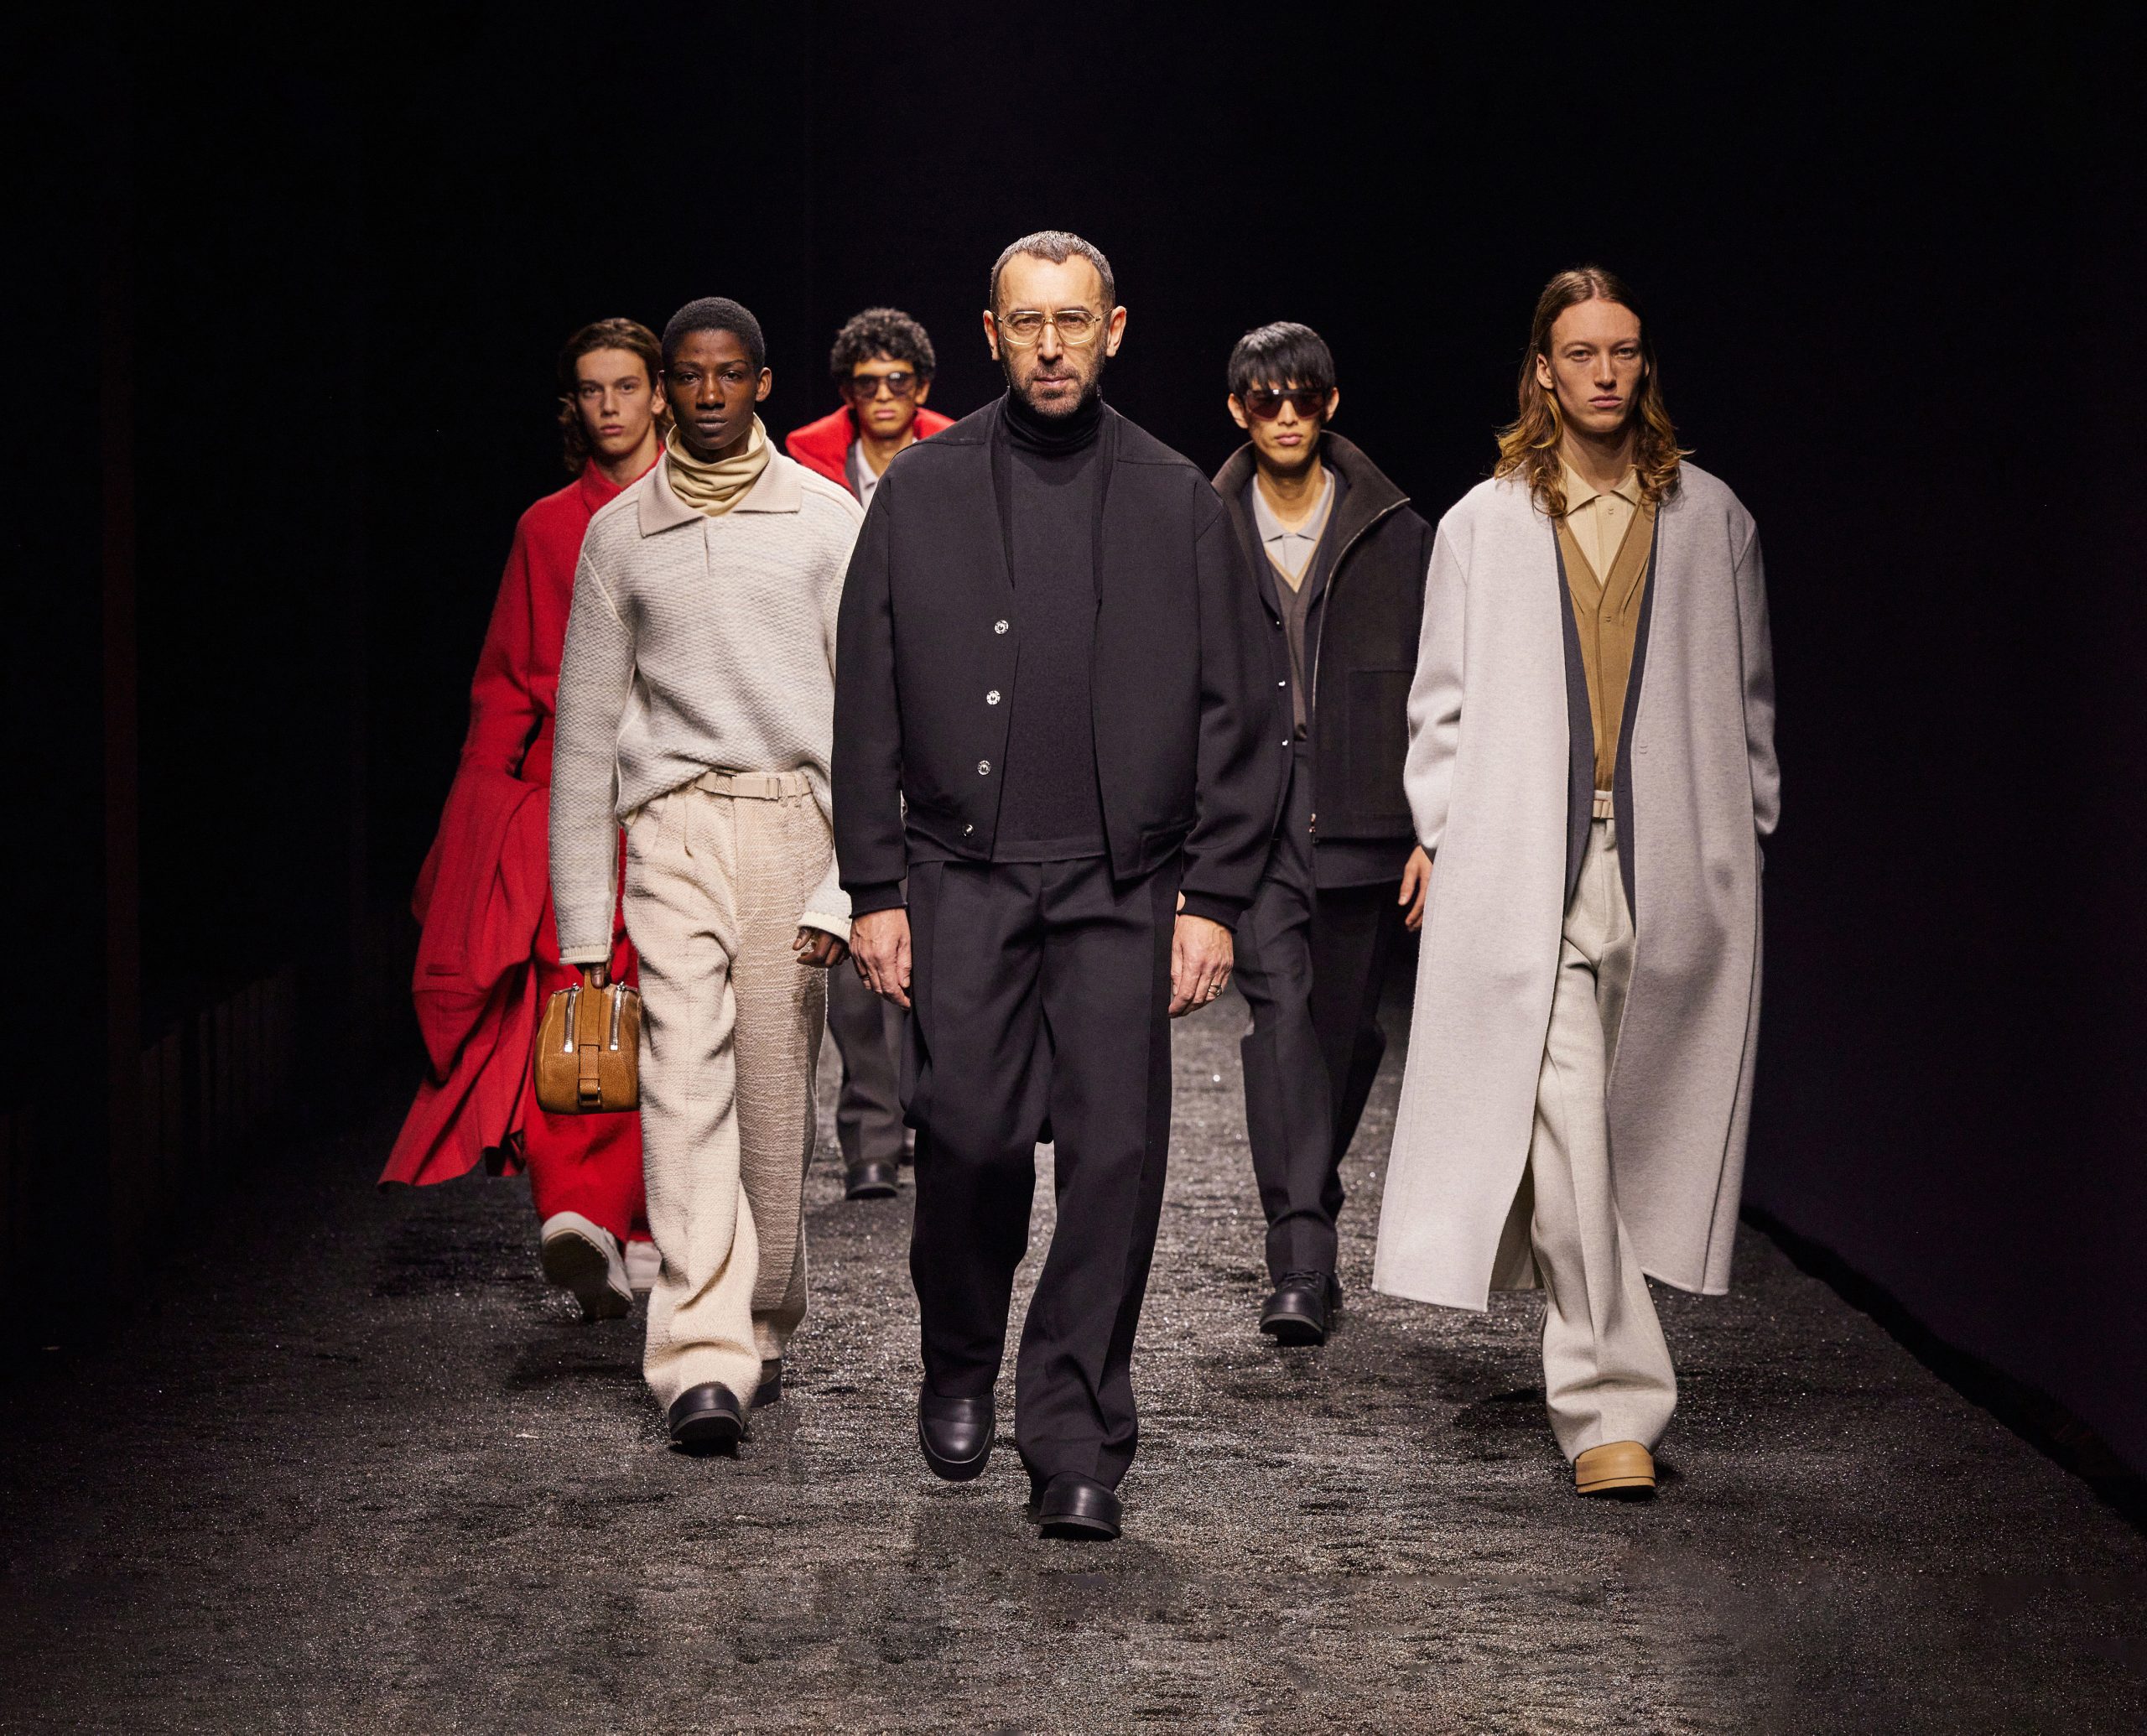 ZEGNA Designs For A Provocative Sense Of Ease At Its FW23 Menswear Show